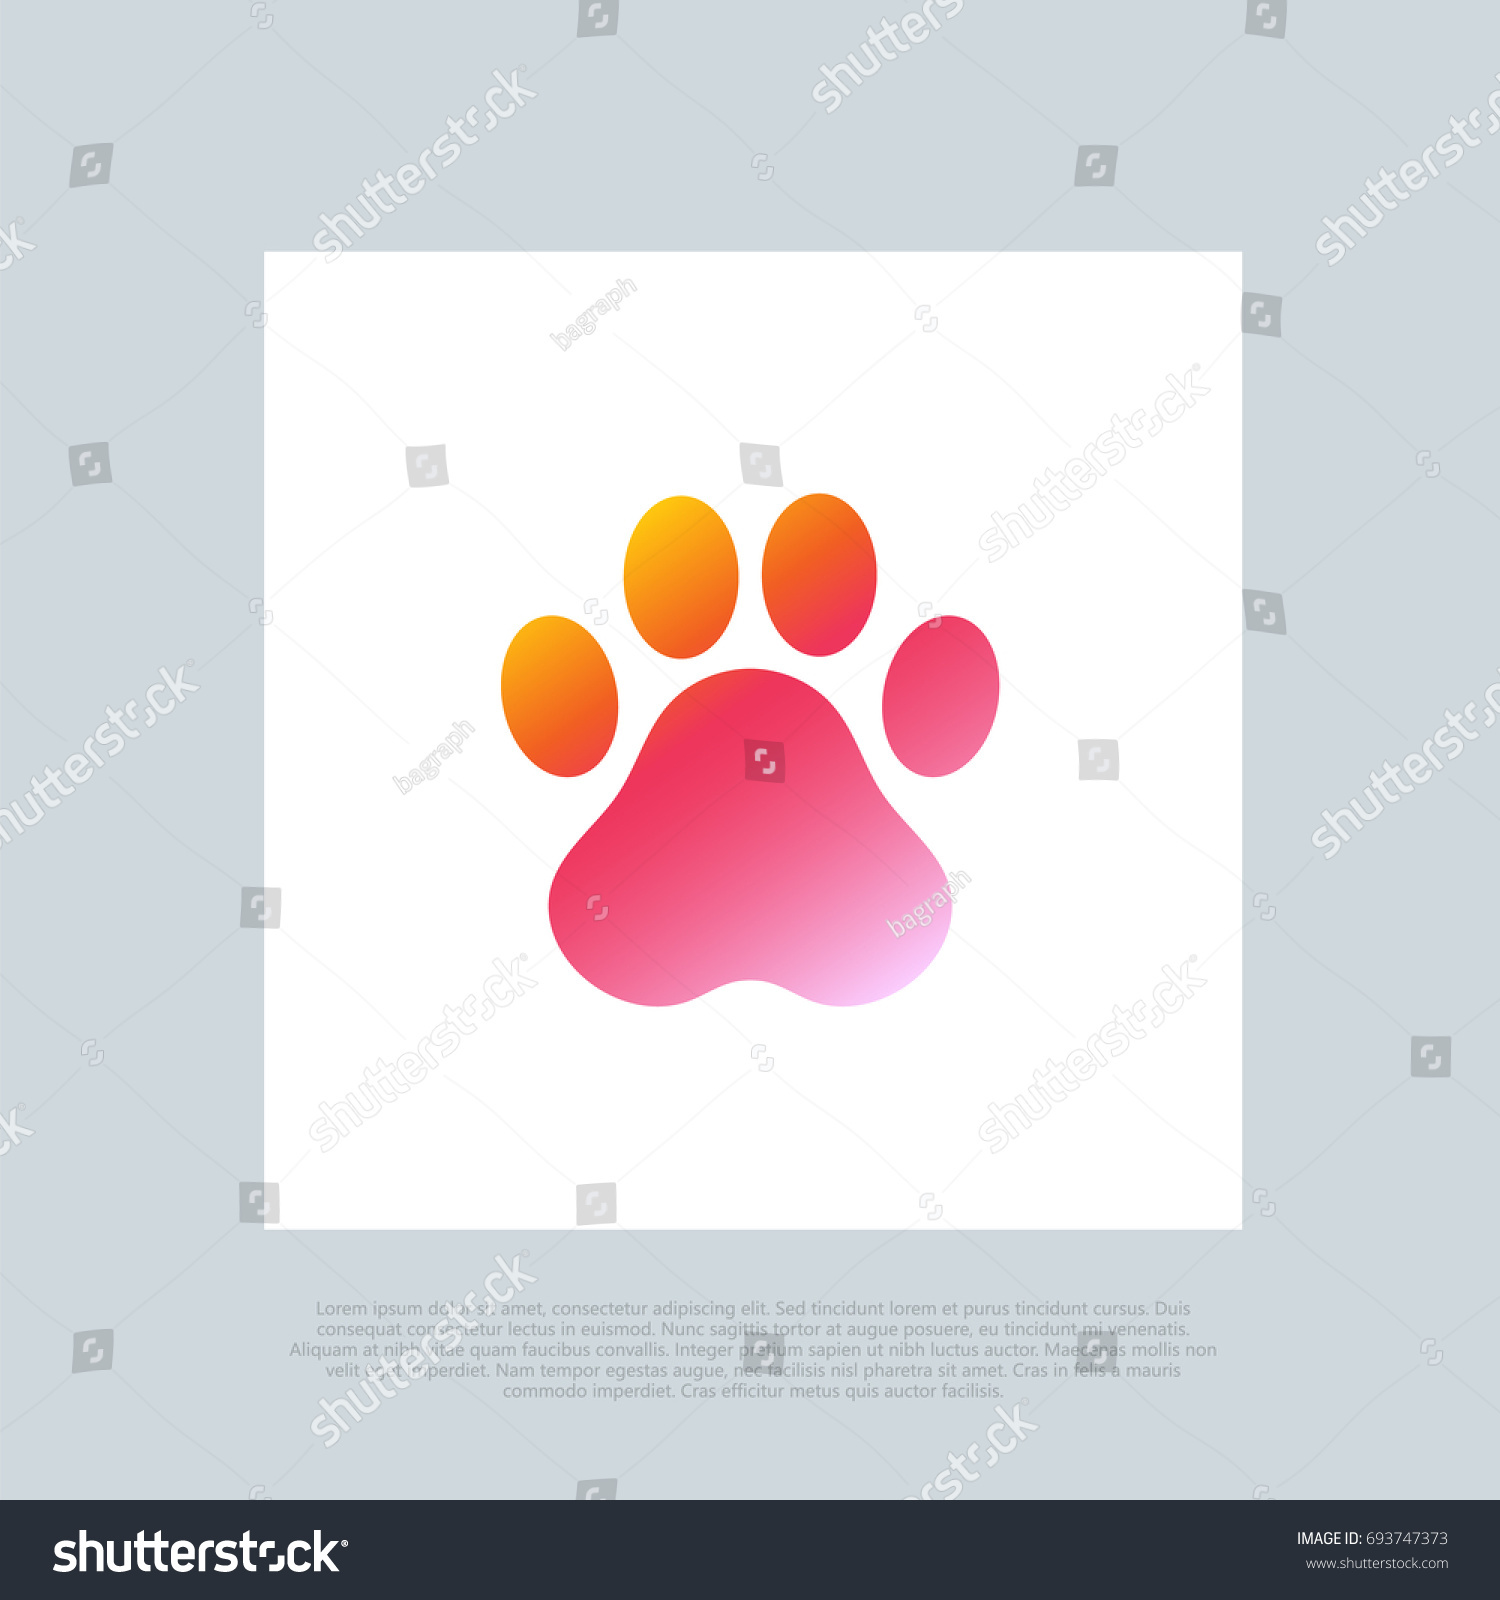 SVG of Animal Footprint. Pet fingers. Vector favicon glyph clip-art. Compatible with PNG, JPG, AI, CDR, SVG, EPS, PDF, ICO. svg